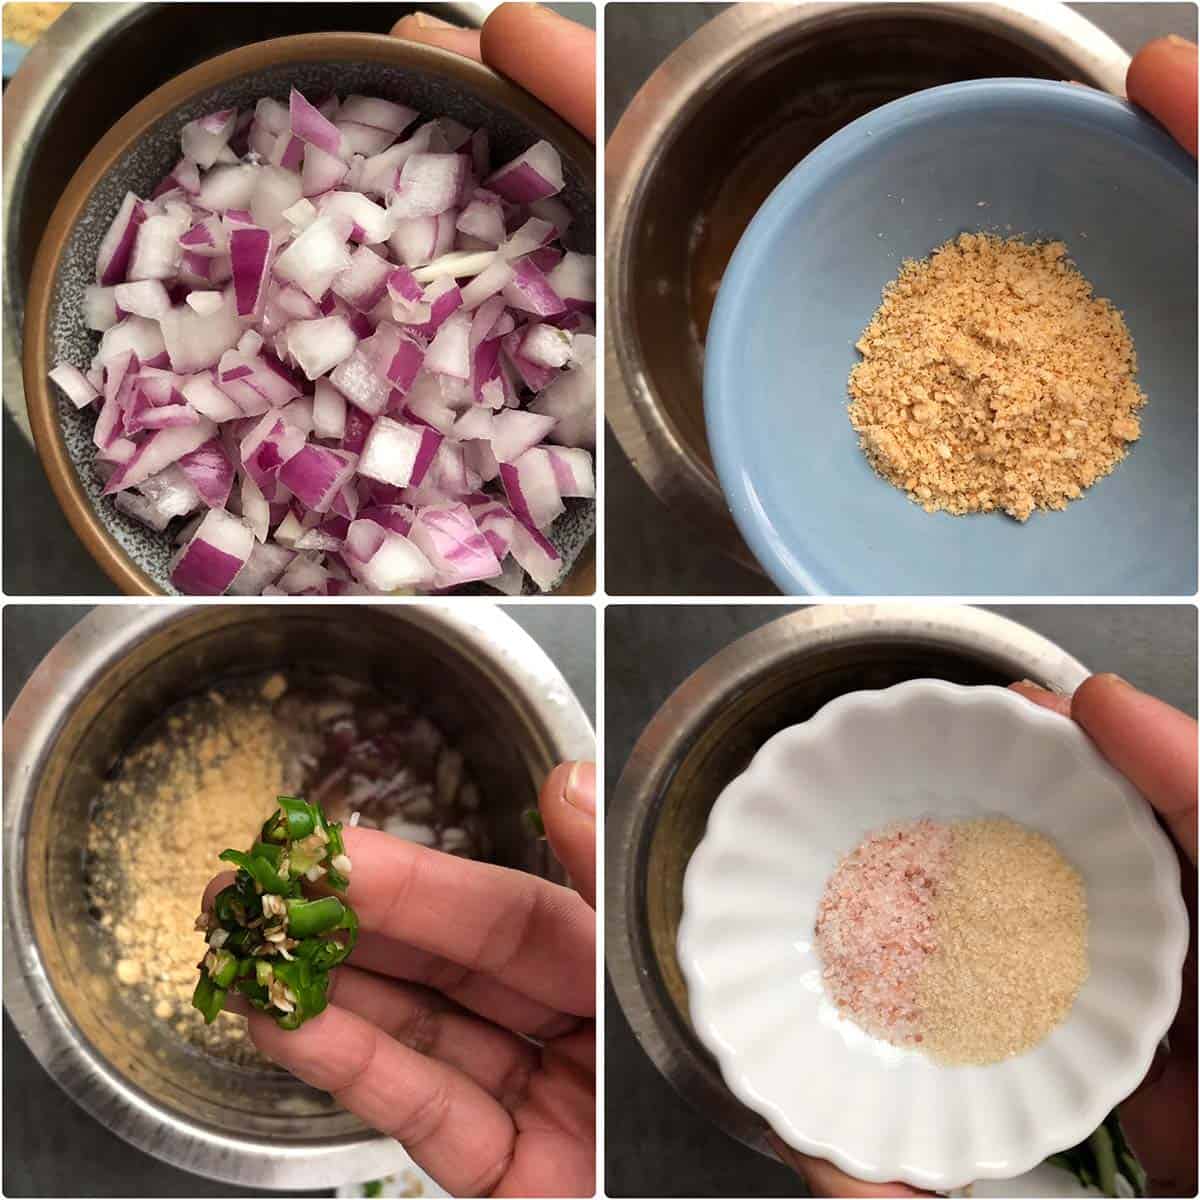 4 panel photo showing the addition of ingredients to tamarind.